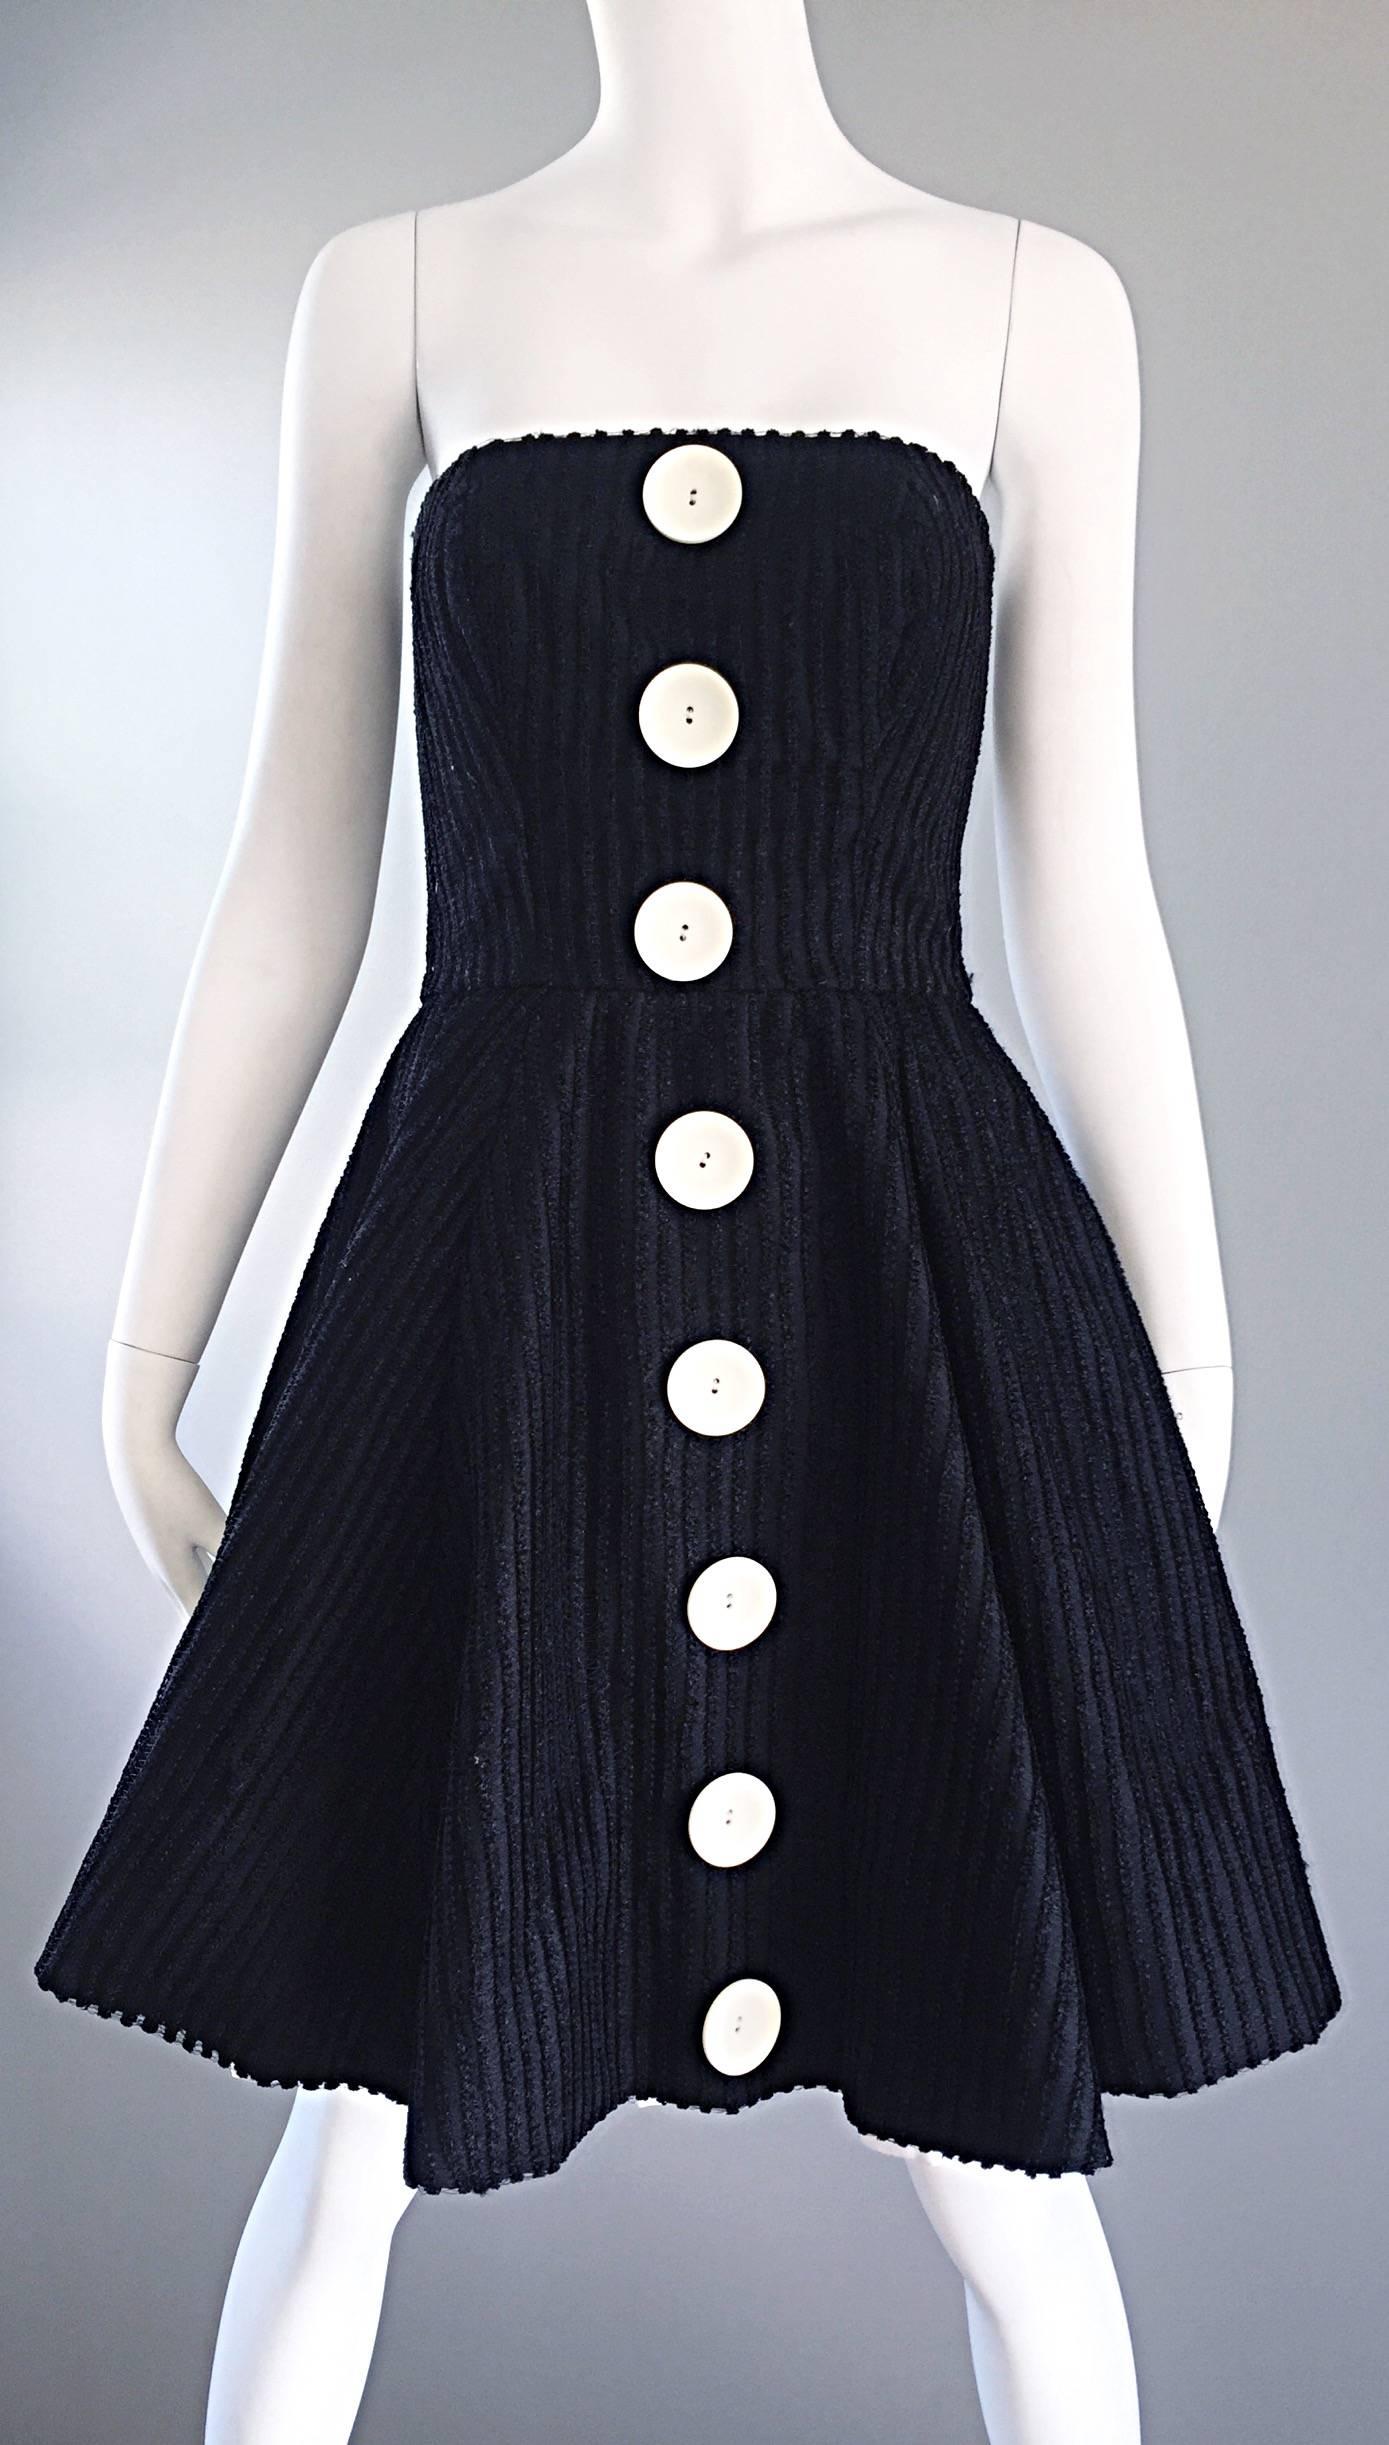 Vintage Christian Lacroix Black and White Fit n' Flare Strapless Button Dress  In Excellent Condition For Sale In San Diego, CA